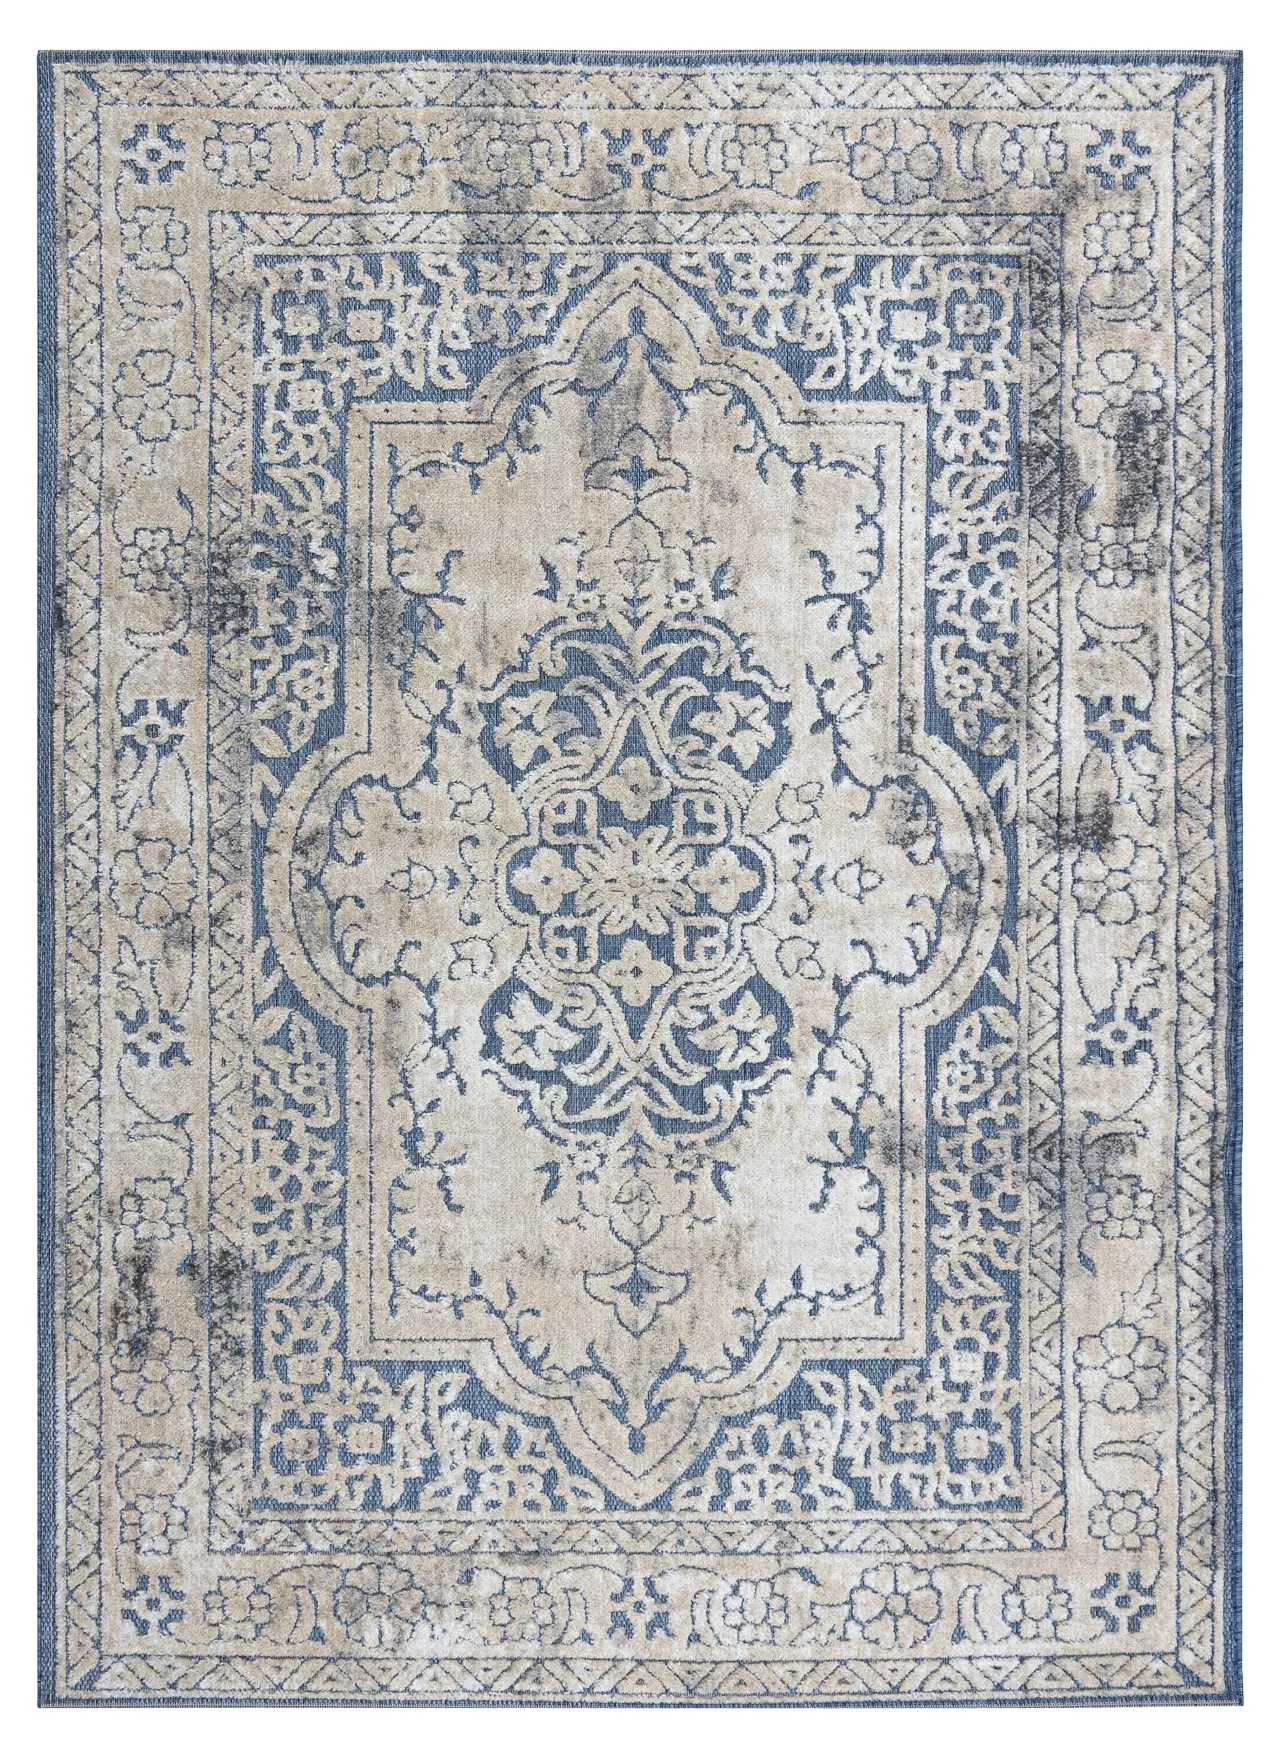 Sole D3871 Tapis Structural Ornement